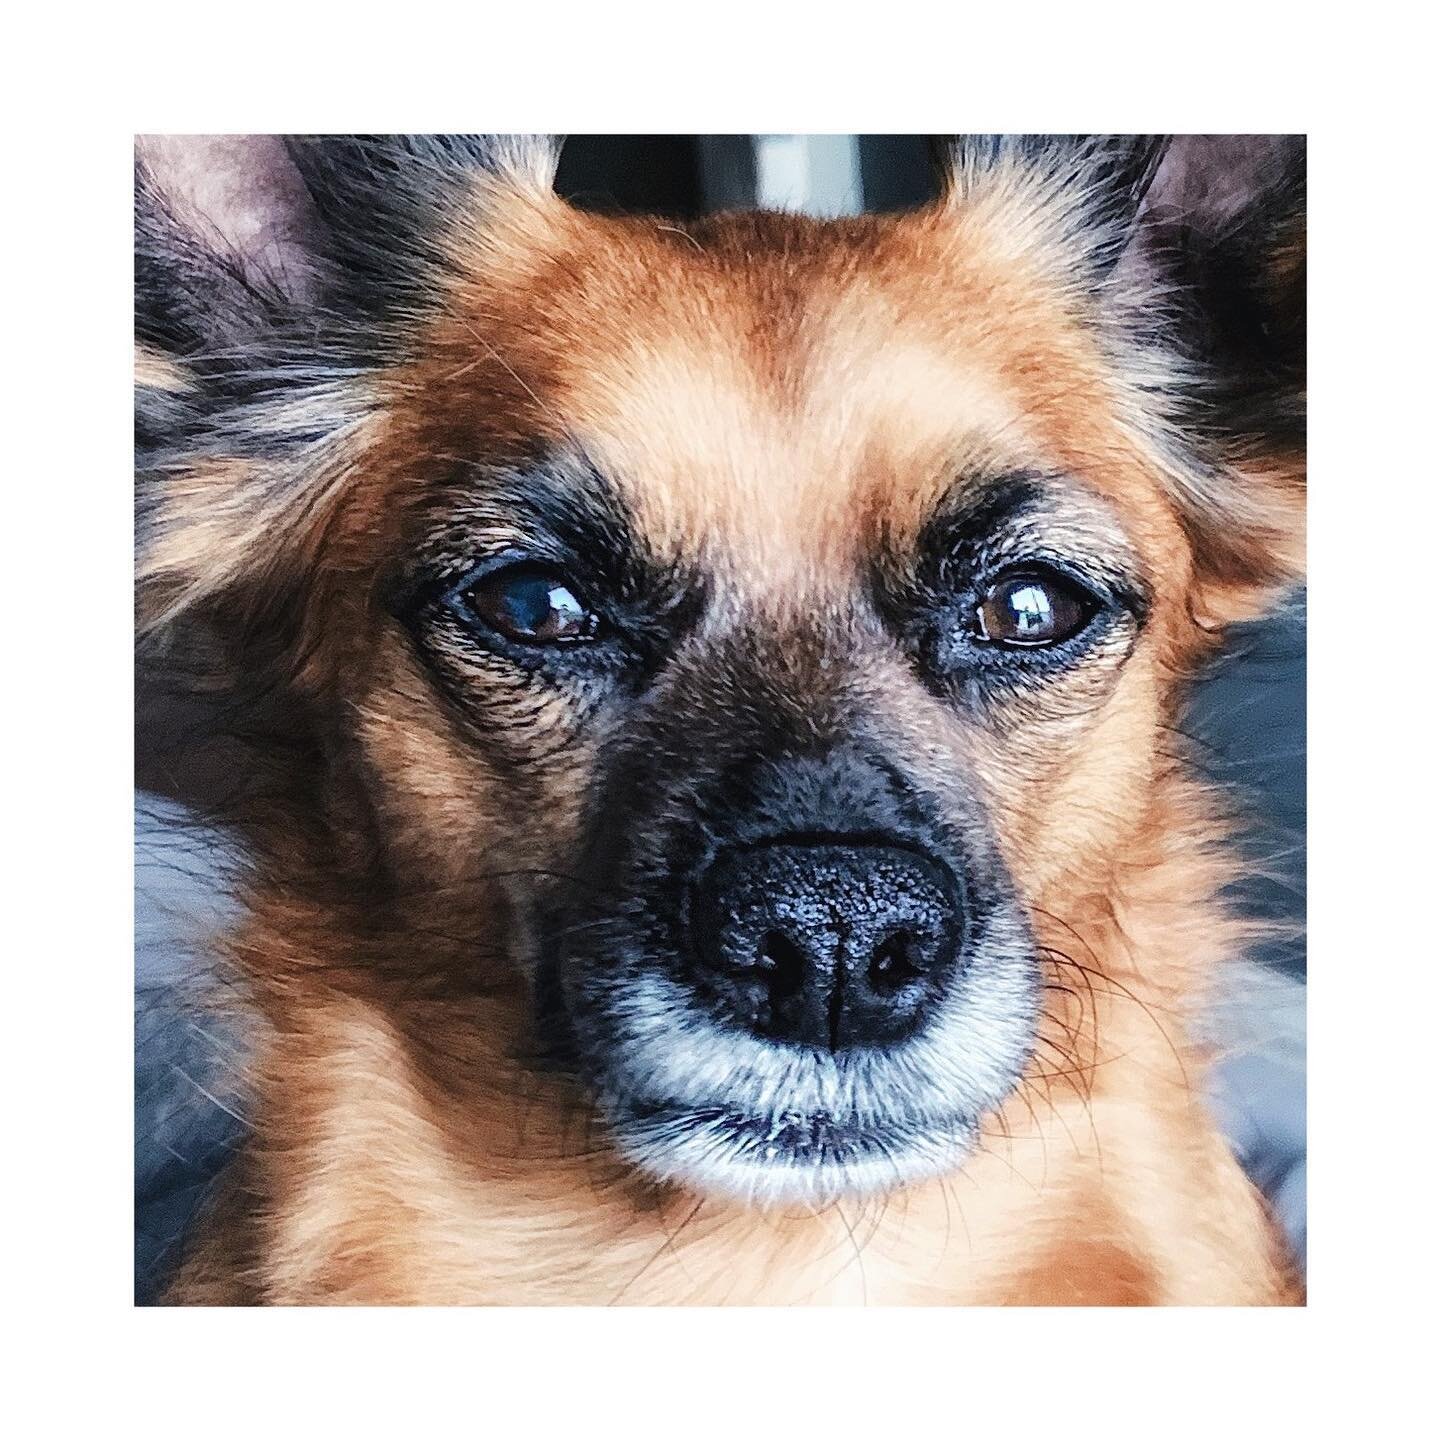 🦊: I made da ultimate sacrifice today and let Mahm take a closeup of me. I did it for da people. Not all hero&rsquo;s wear capes... -Foxy
.
.
.

#rescuedogsrule #dogsofinstagram #woofwoof #adoptashelterdog #chihuahuasofinstagram #dogslife #bestwoof 